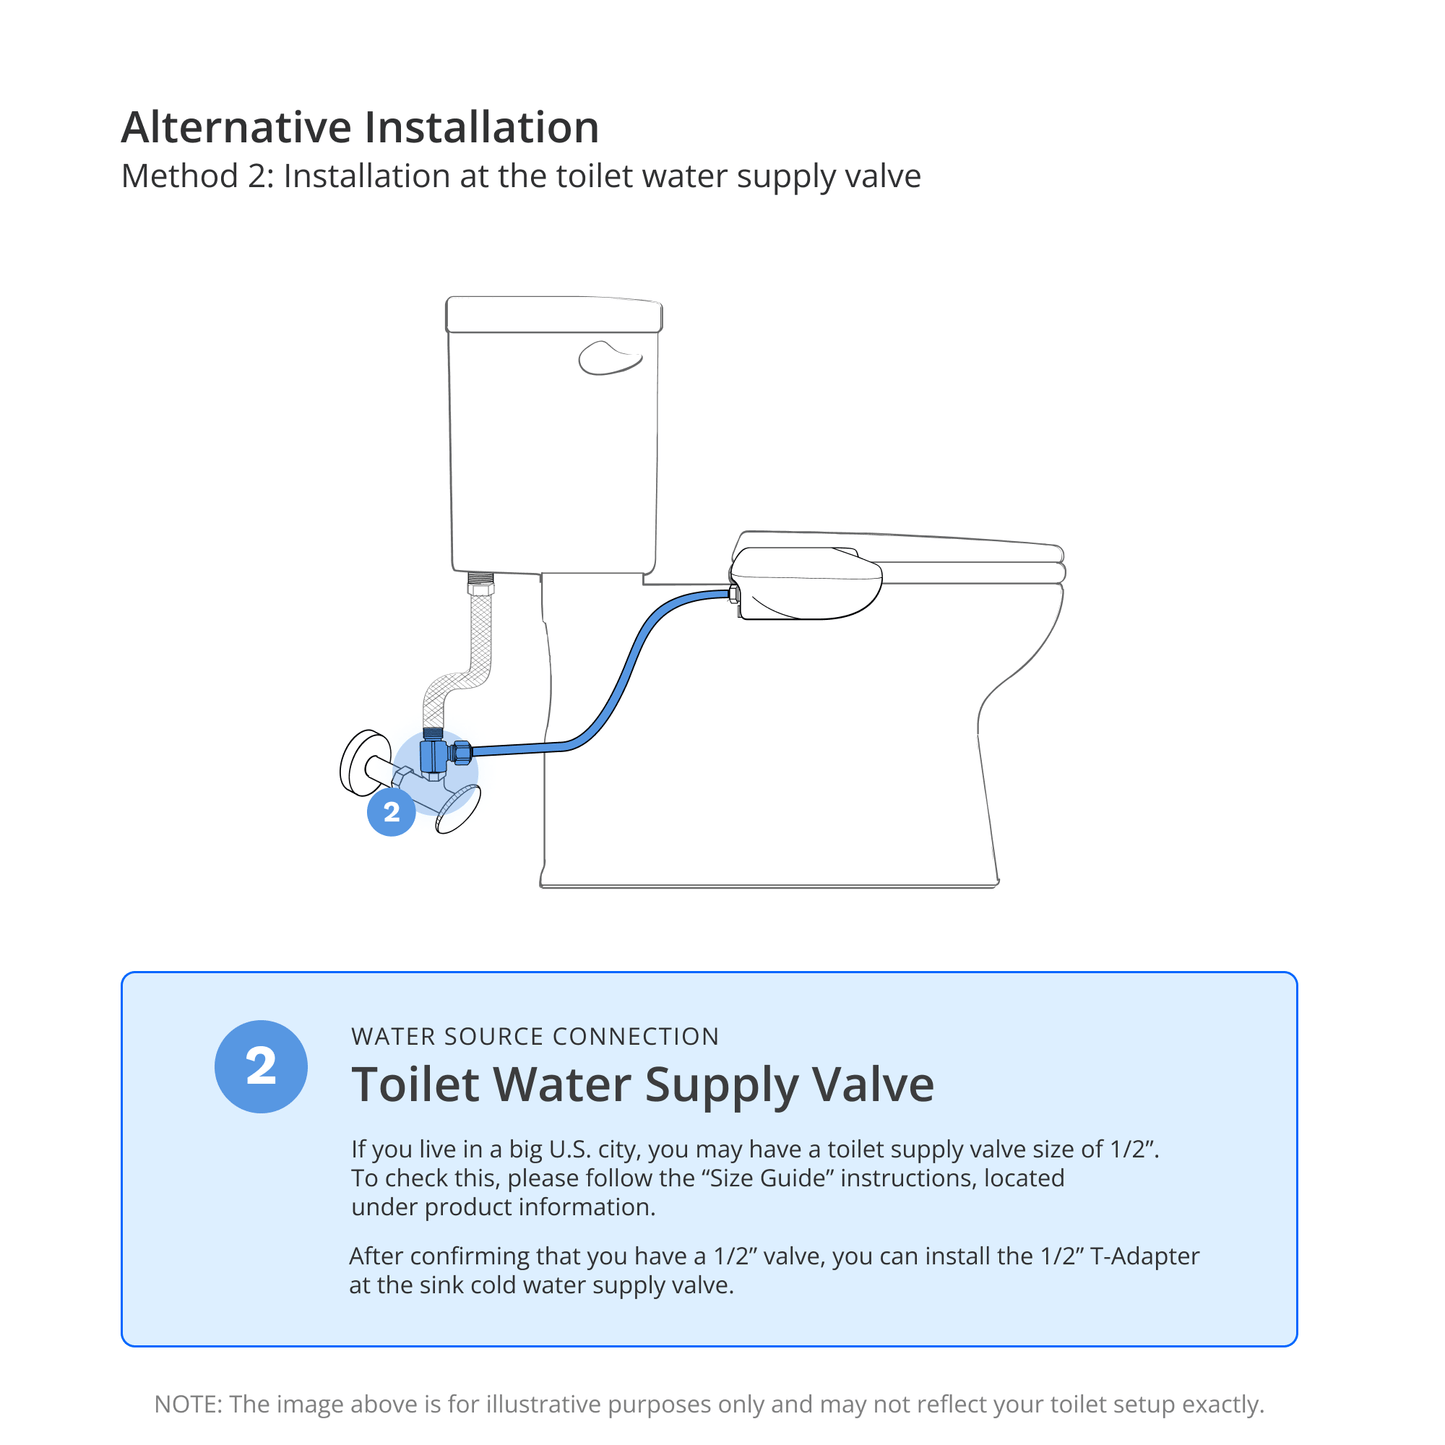 Alternative Installation Method 2: Installation at the toilet water valve. You may use either water source.